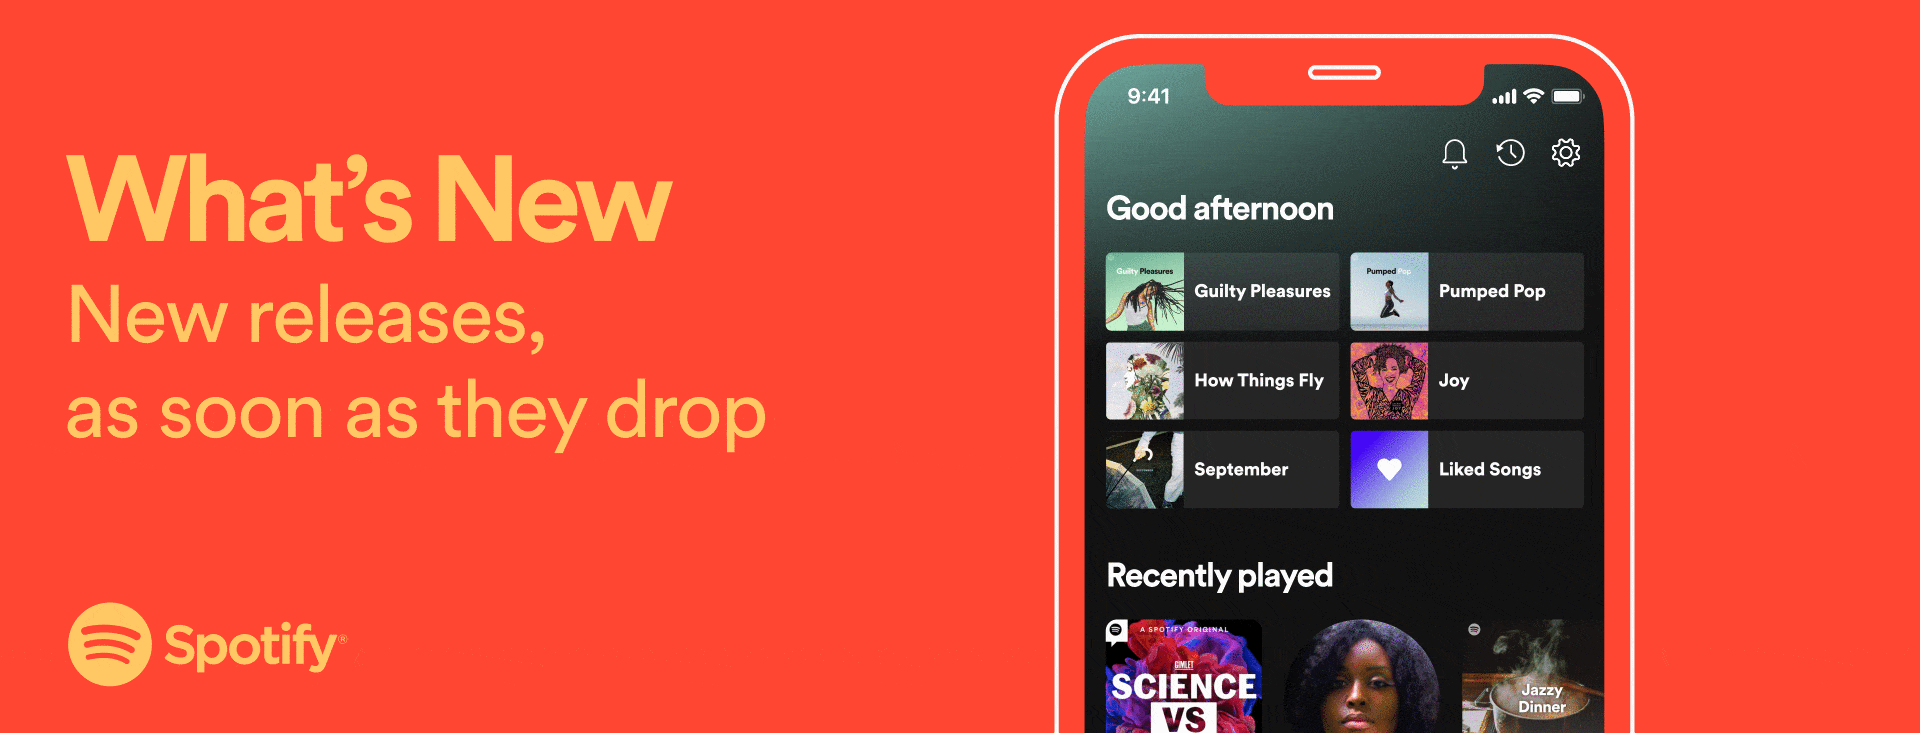 Spotify’s What’s New section of the app.